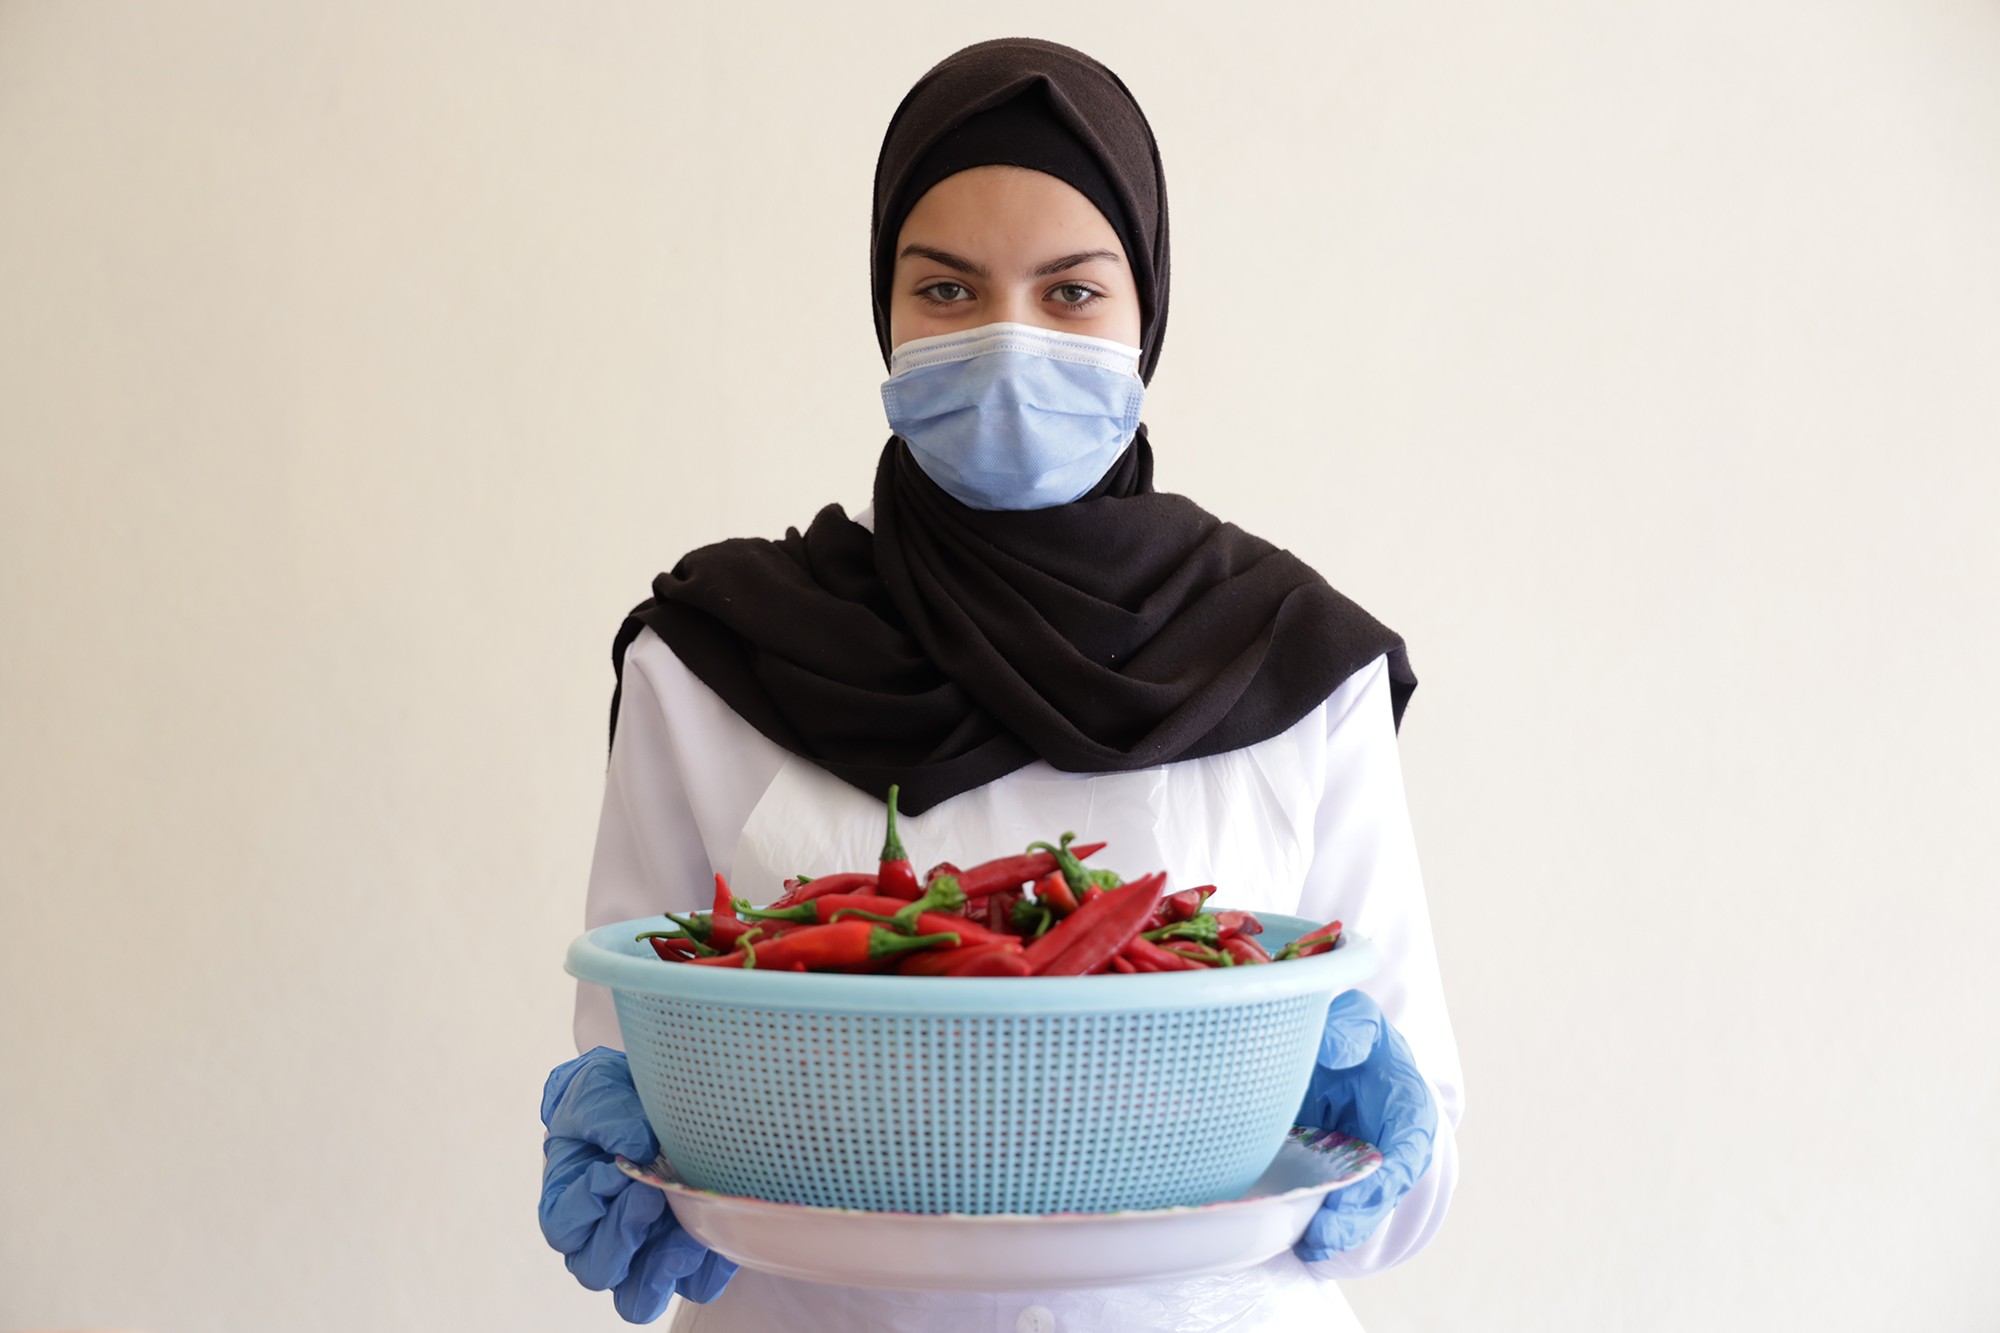 Aya, 16-year-old from Syria and participant in a cooking course in Bint Jbeil.